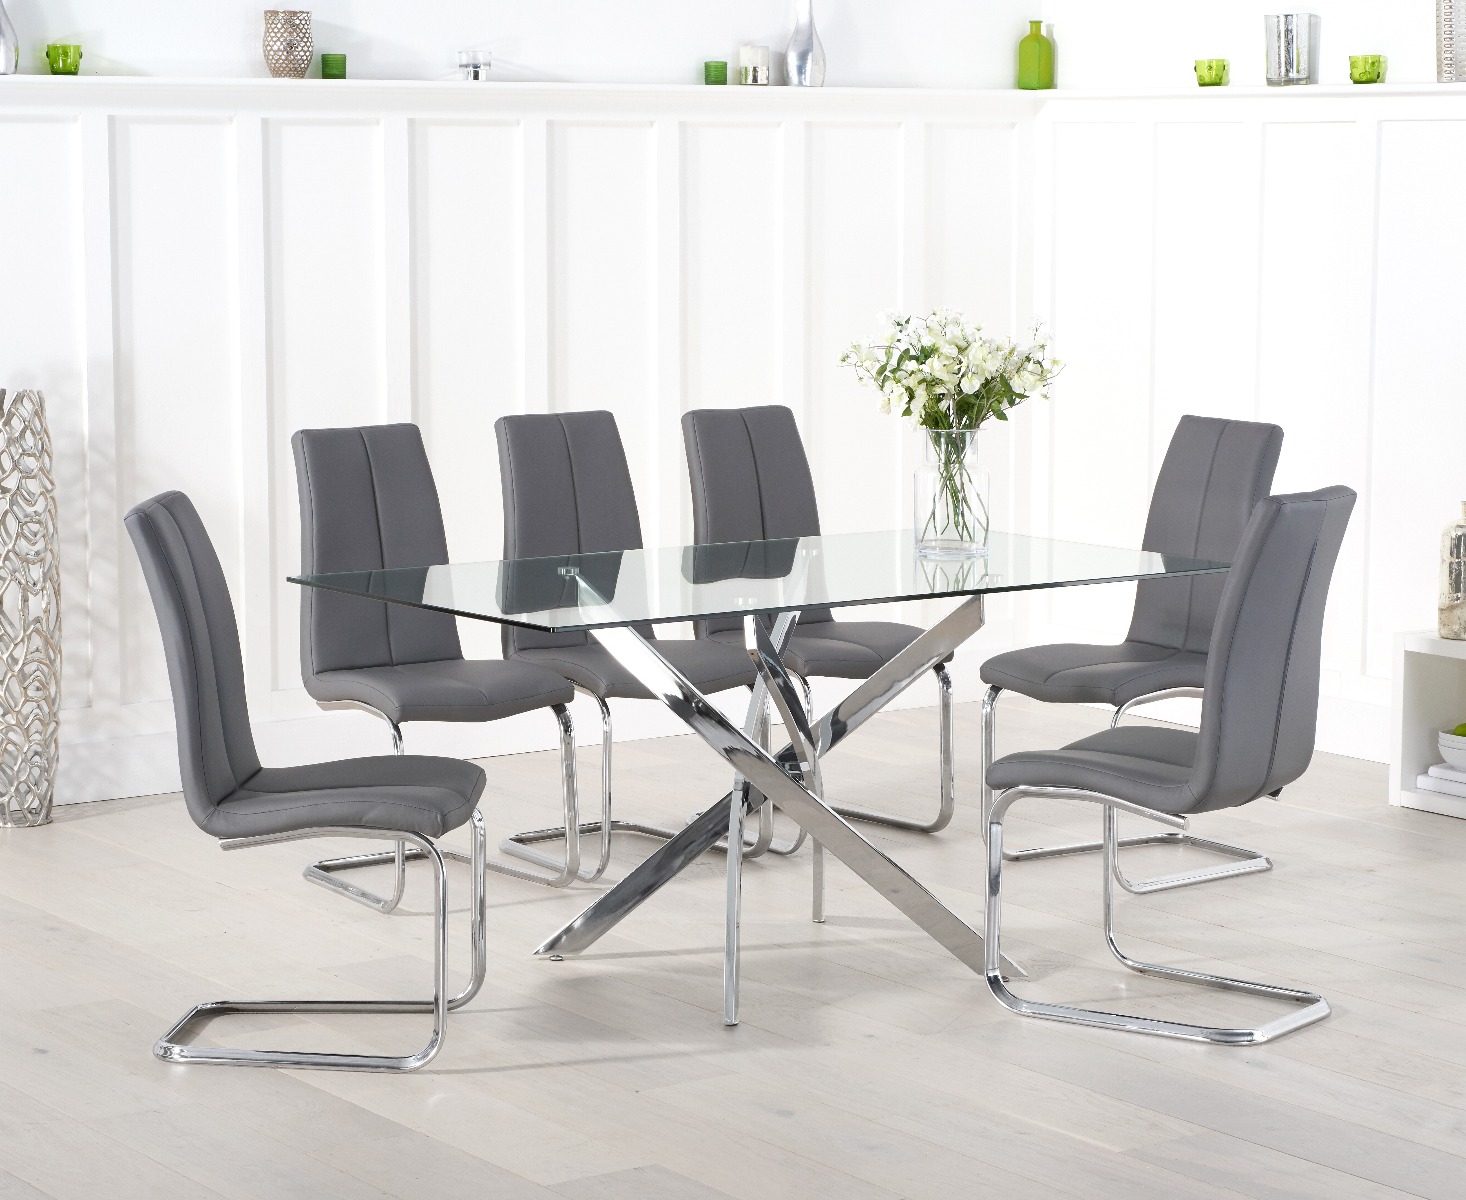 Denver 160cm Rectangular Glass Dining Table With 4 Grey Gianni Chairs